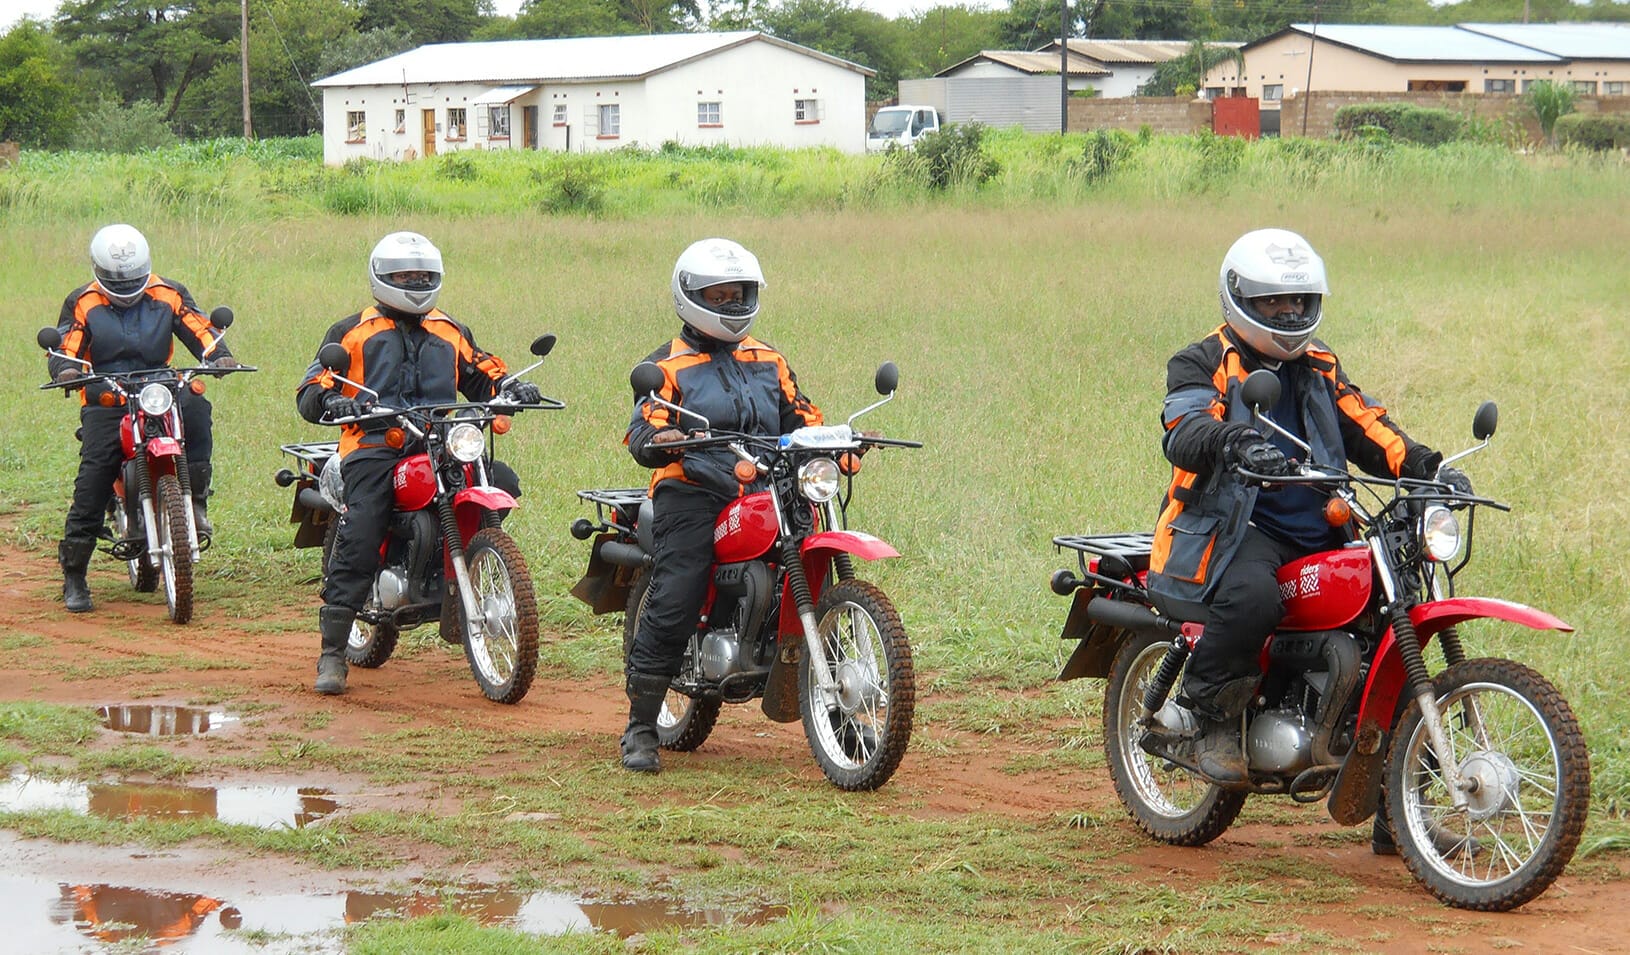 Health workers being trained to ride motorcycles, Lesotho.